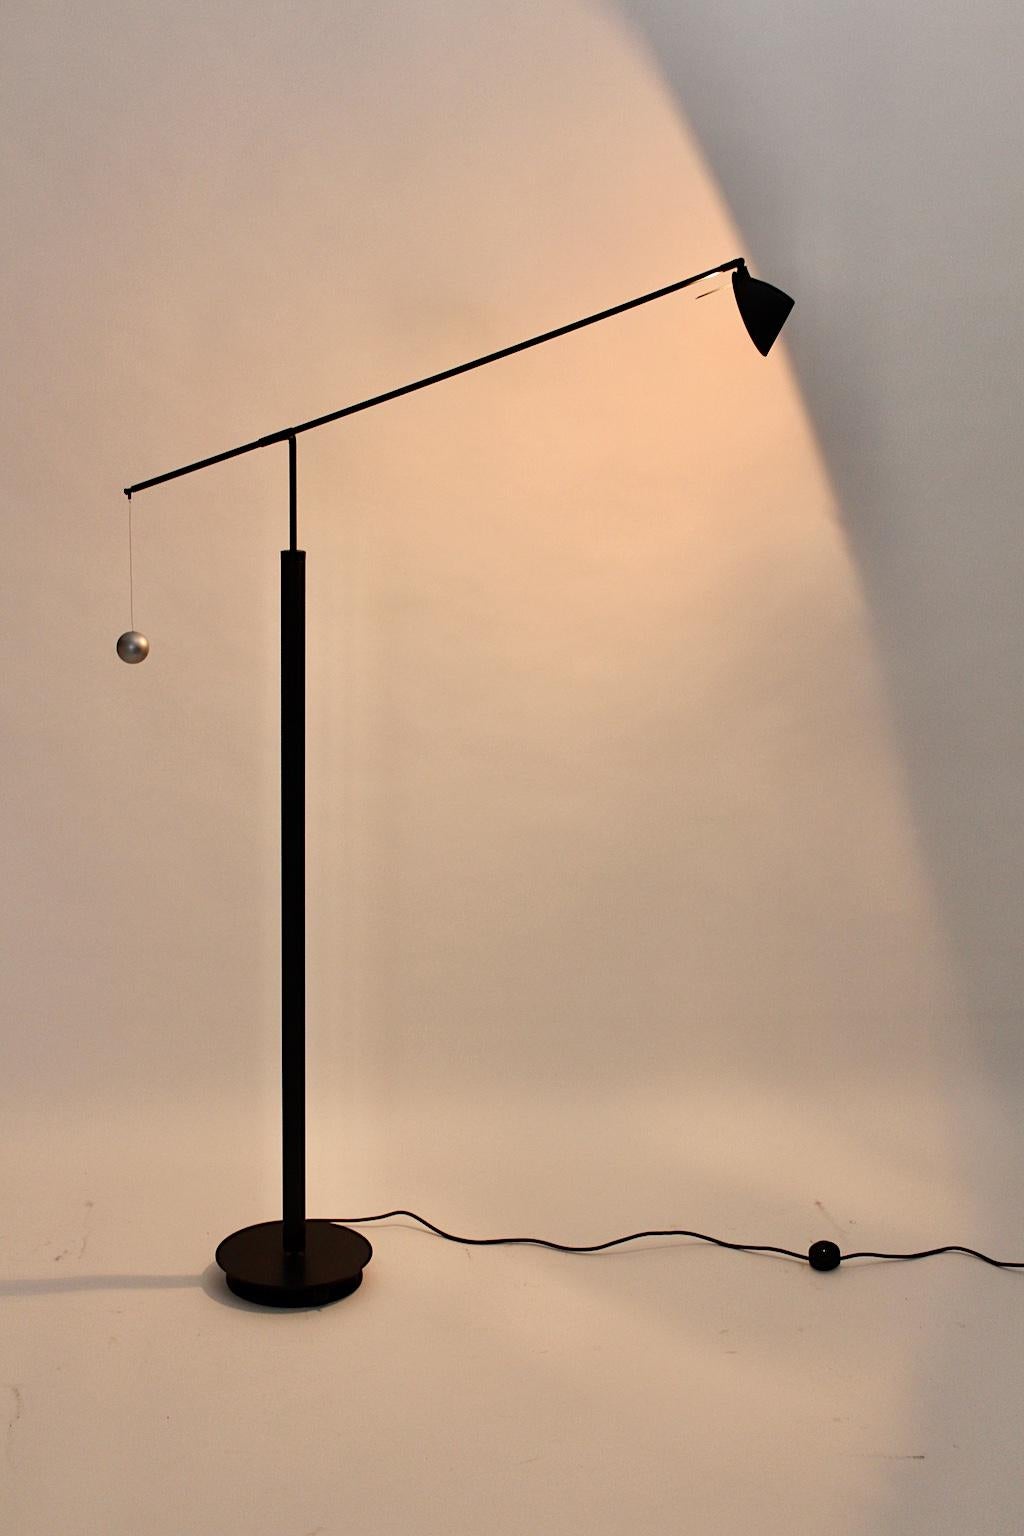 A Postmodern vintage black floor lamp, which was designed by Carlo Forcolini 1989 for Artemide, Italy.
It is labeled underneath the base: Artemide Milano Modelo Nestore Lettura Design Carlo Forcolini 
Made in Italy 220 V.
The black metal